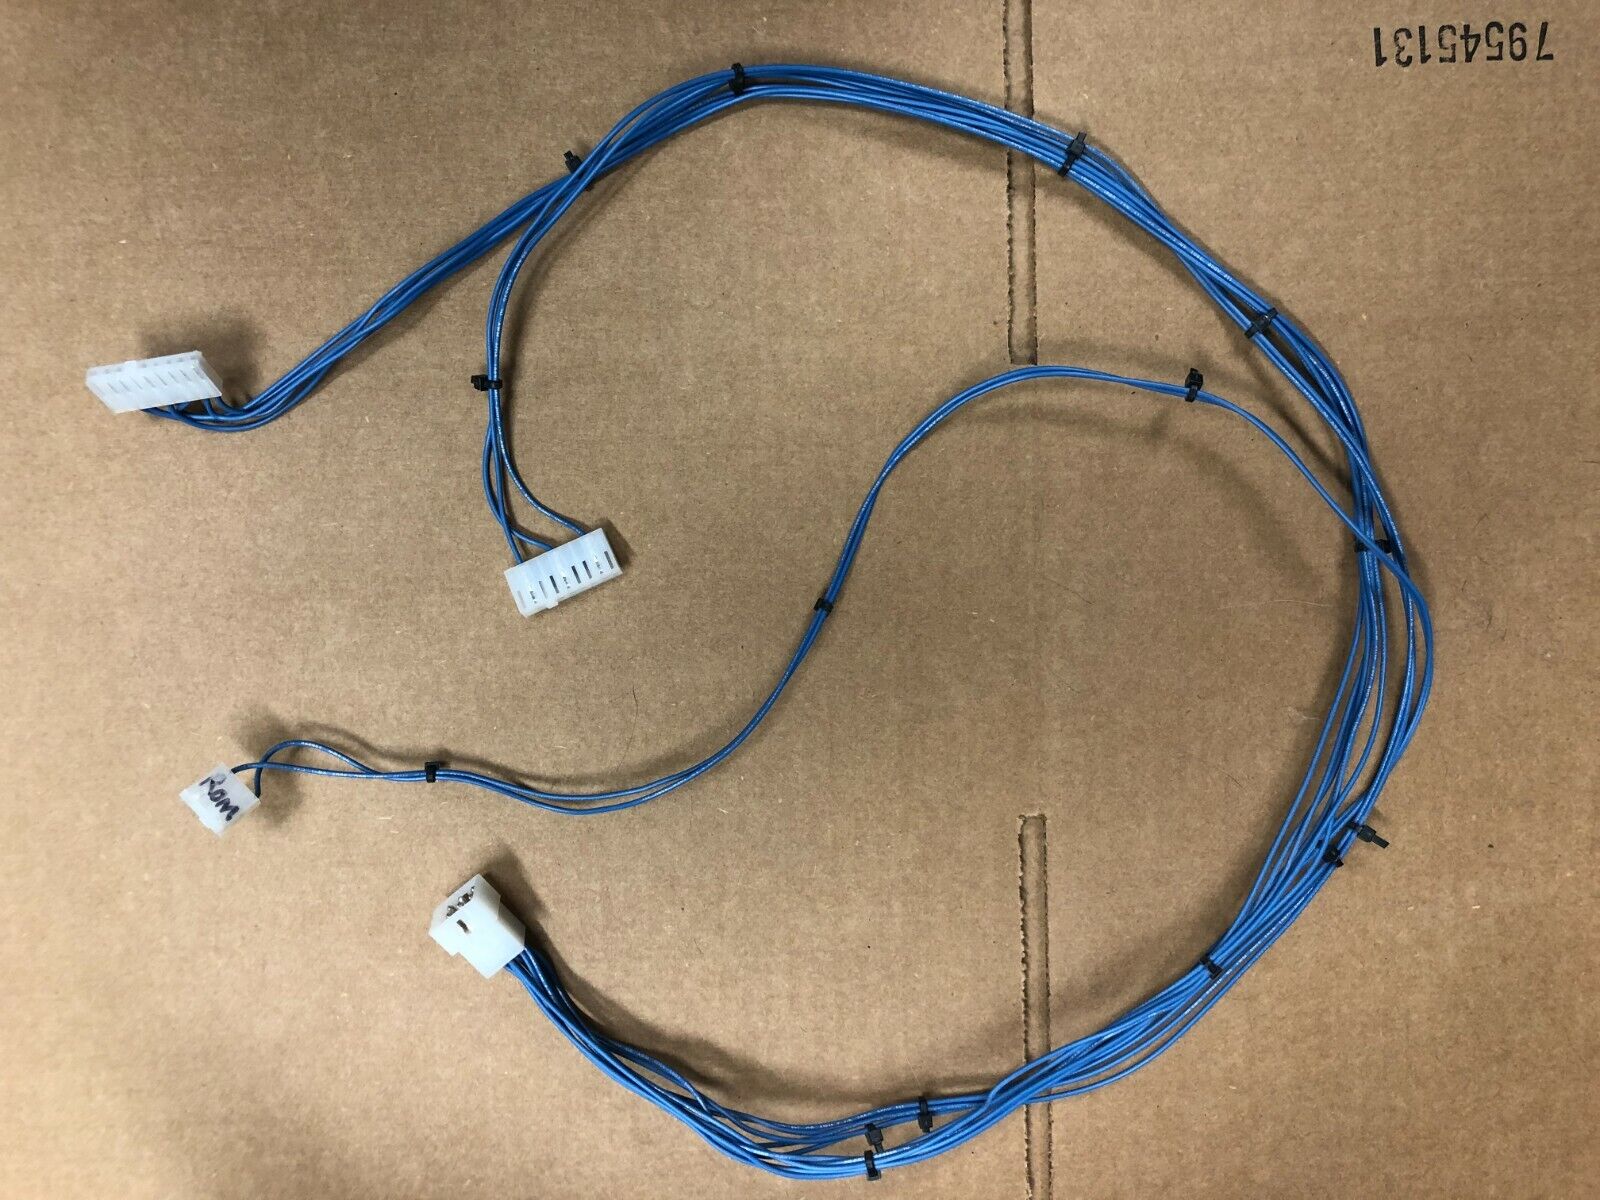 William's Stargate POWER WIRING HARNESS for use with switching power supply